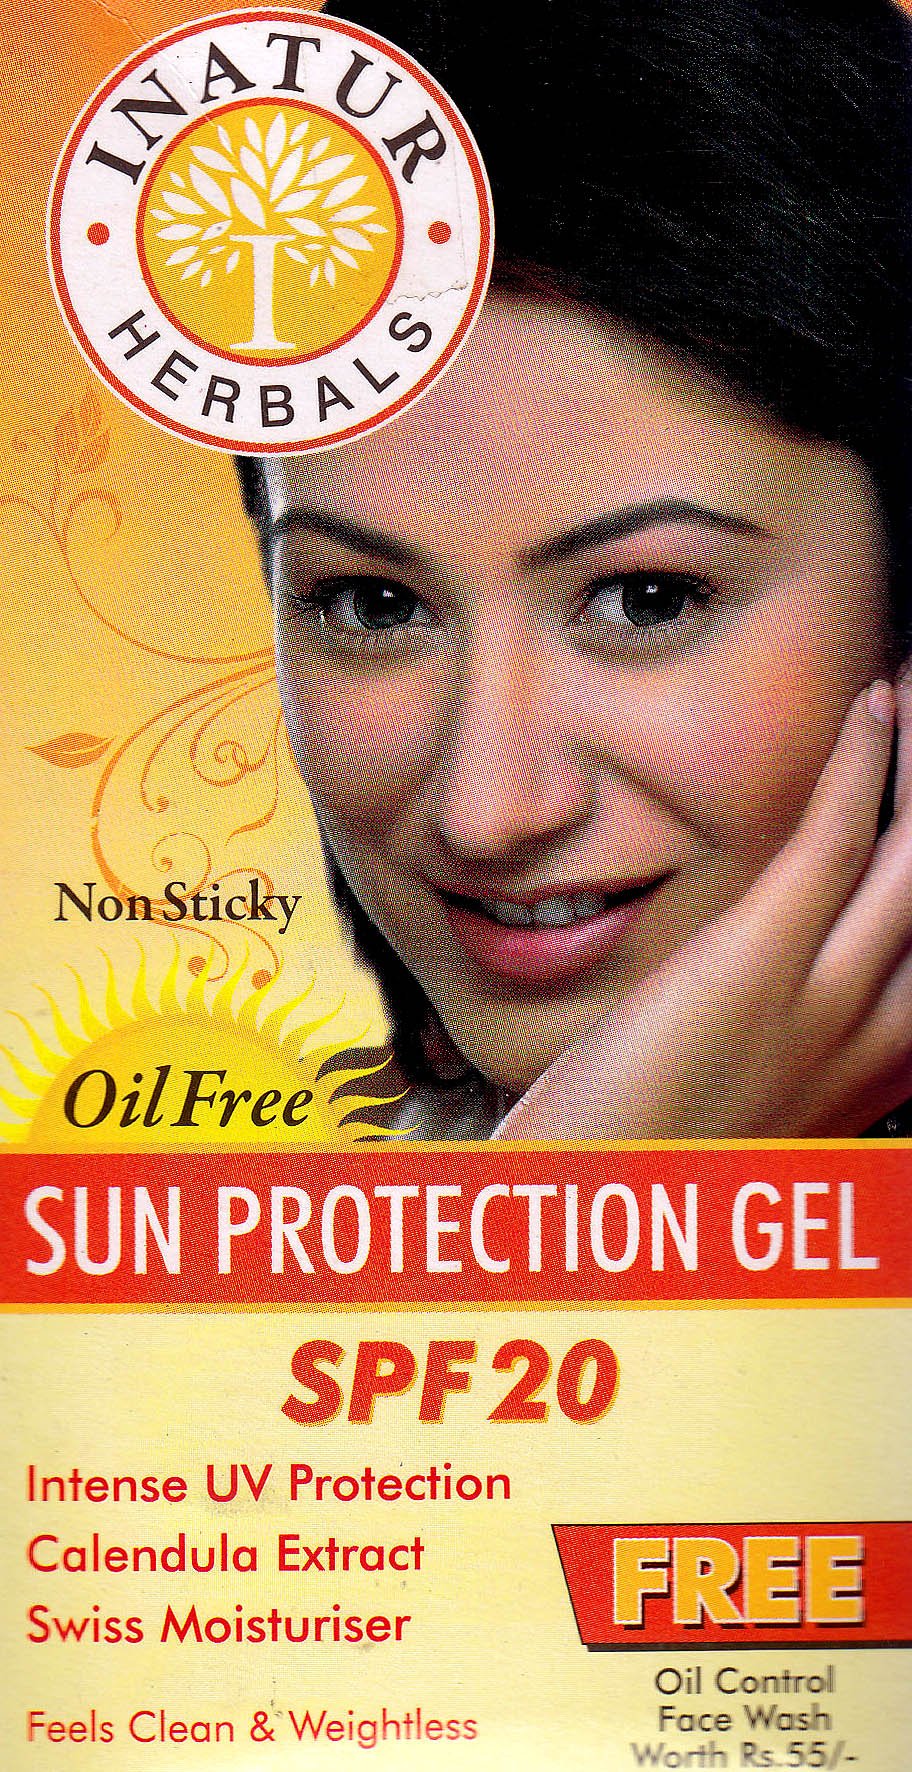 Sun Protection Gel : Oil Free (SPF 20) - book cover